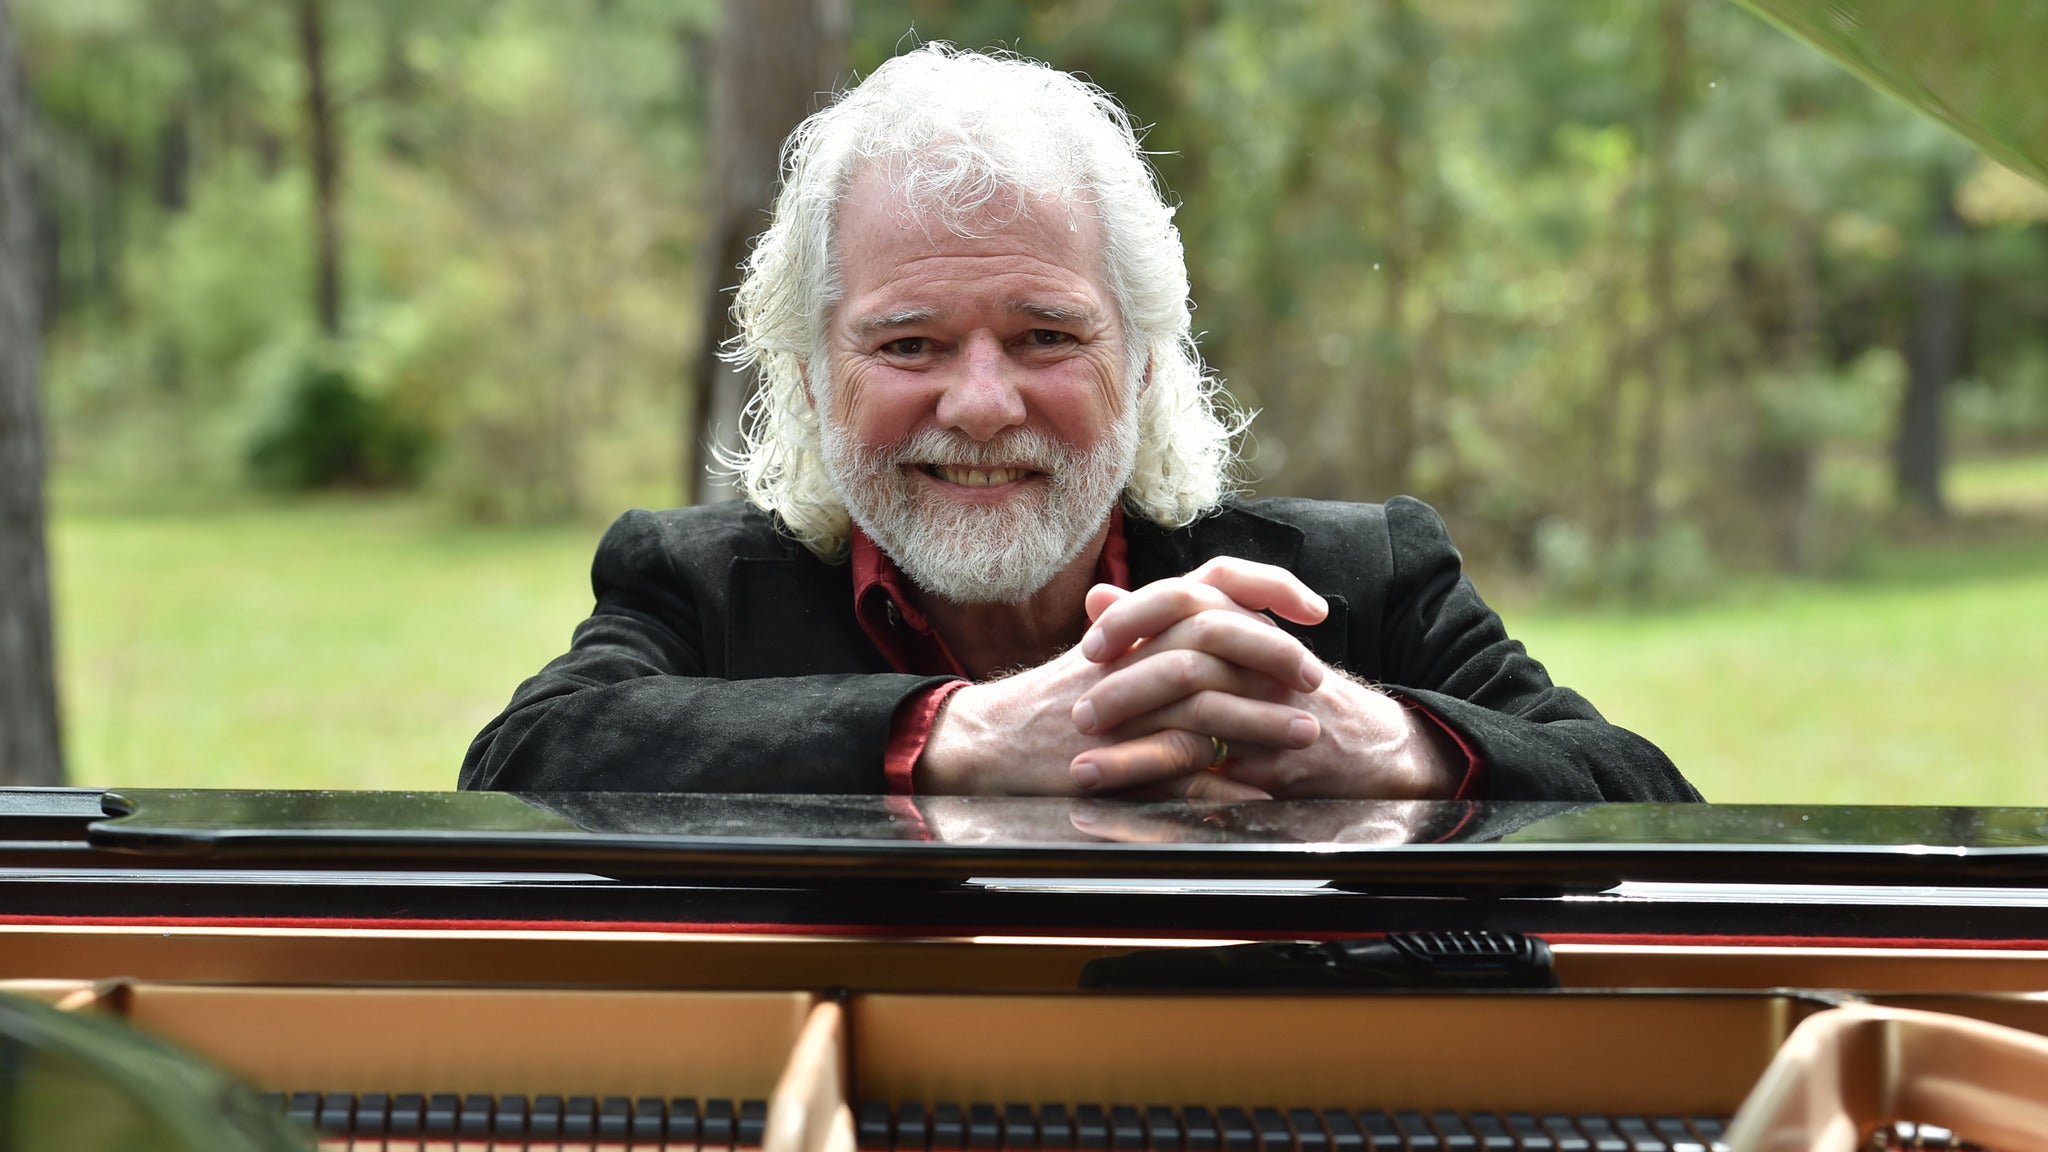 A Night of Georgia Music: Mike Mills, Robert McDuffie & Chuck Leavell in Atlanta promo photo for VIP Package presale offer code